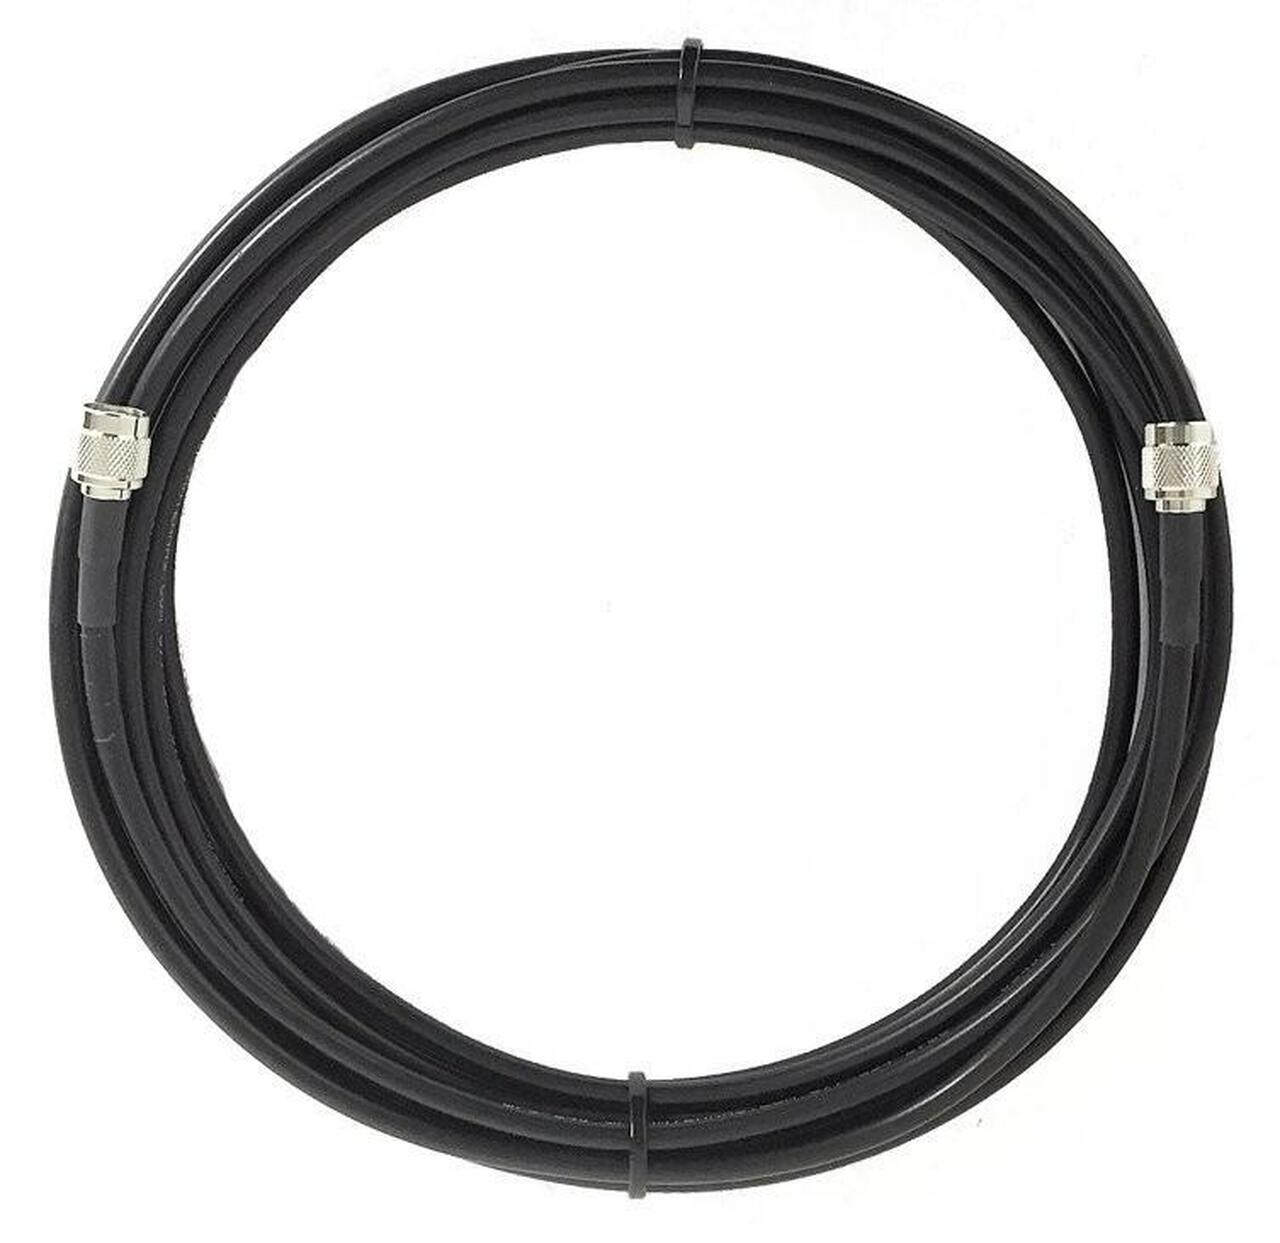 Bolton240 Low-Loss BLACK Cable | 5m N-Male to N-Male